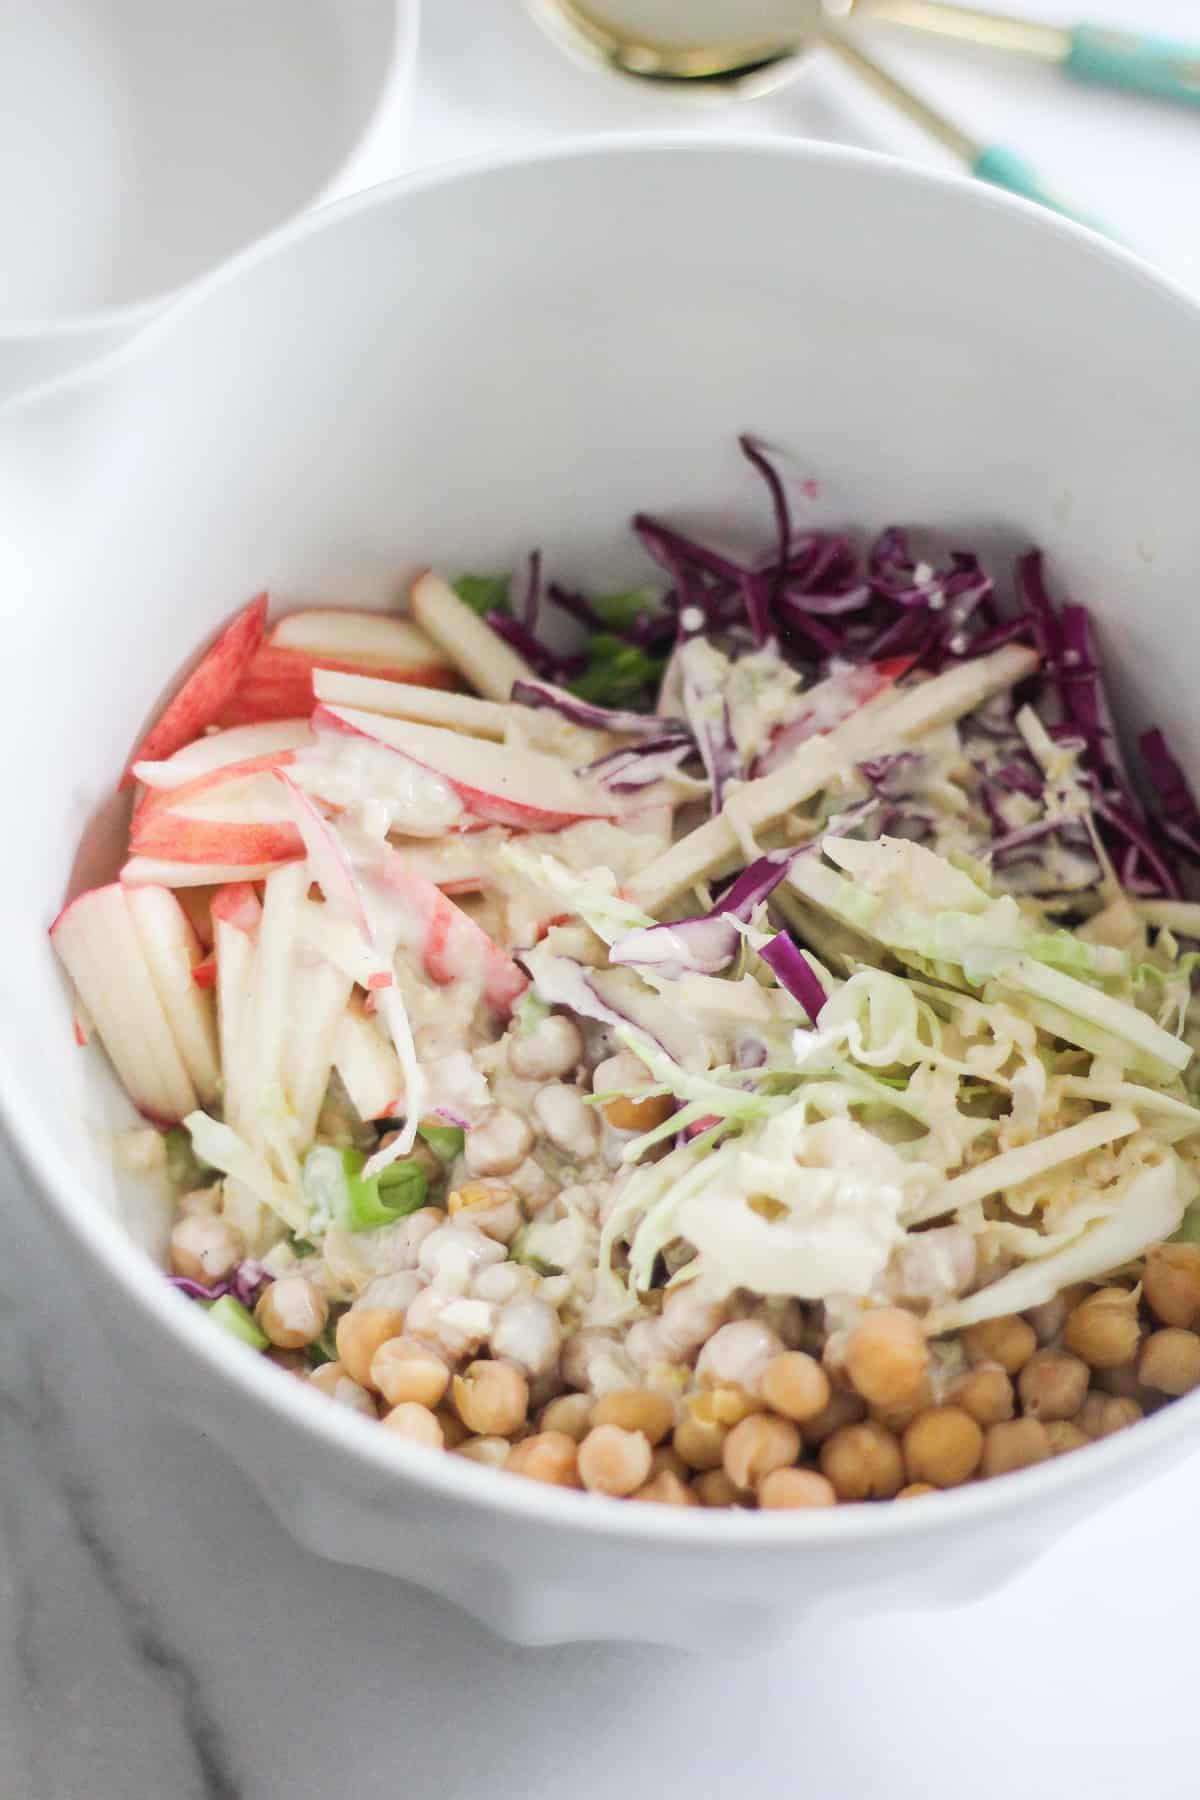 Cabbage, chickpeas, and apples with creamy dressing in a large white mixing bowl.